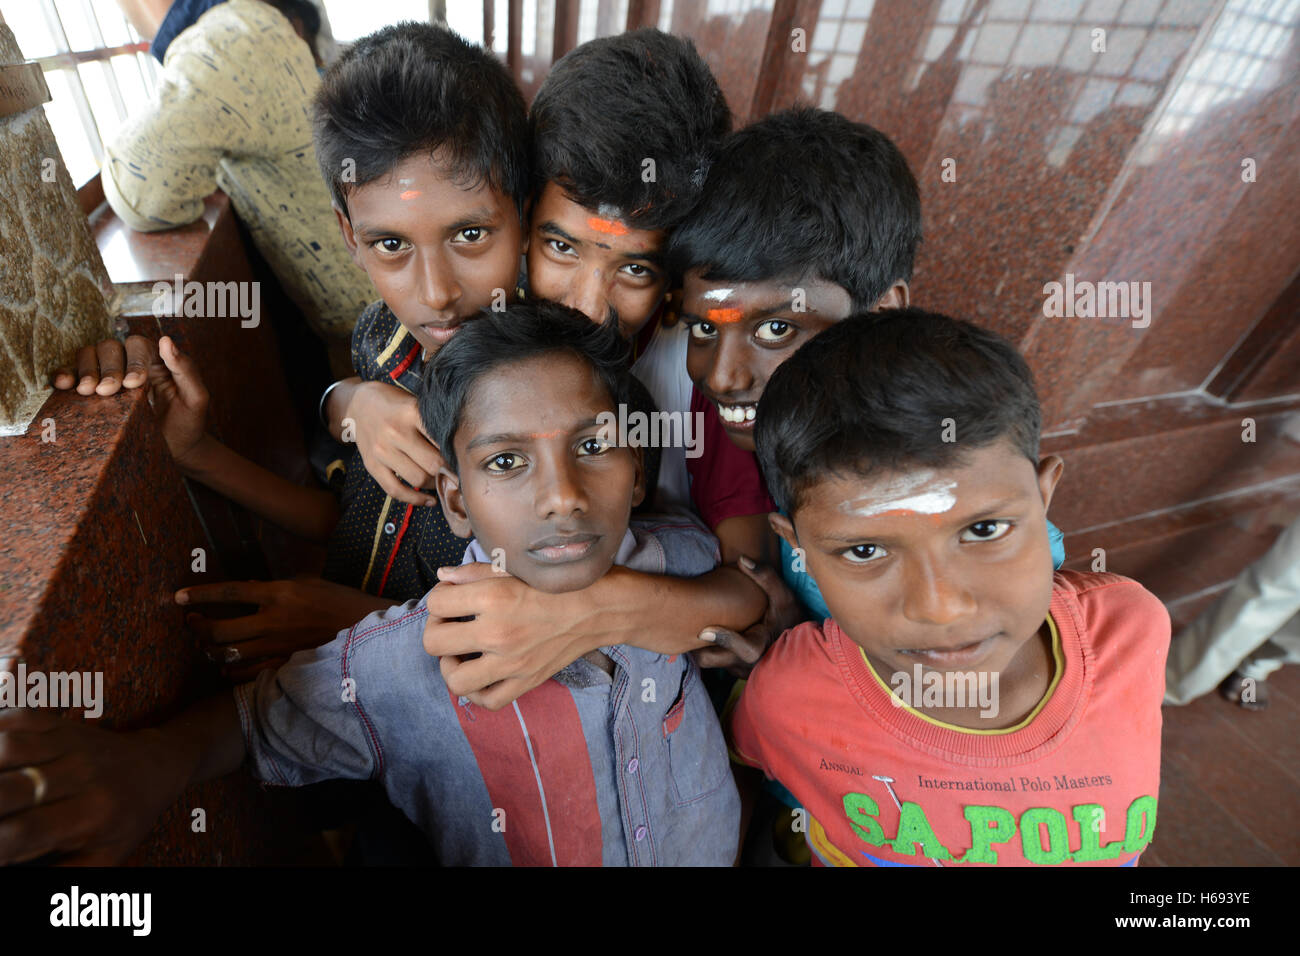 Tamil children posing for a photo on top of the Rockfort temple in Tiruchirappalli, India. Stock Photo